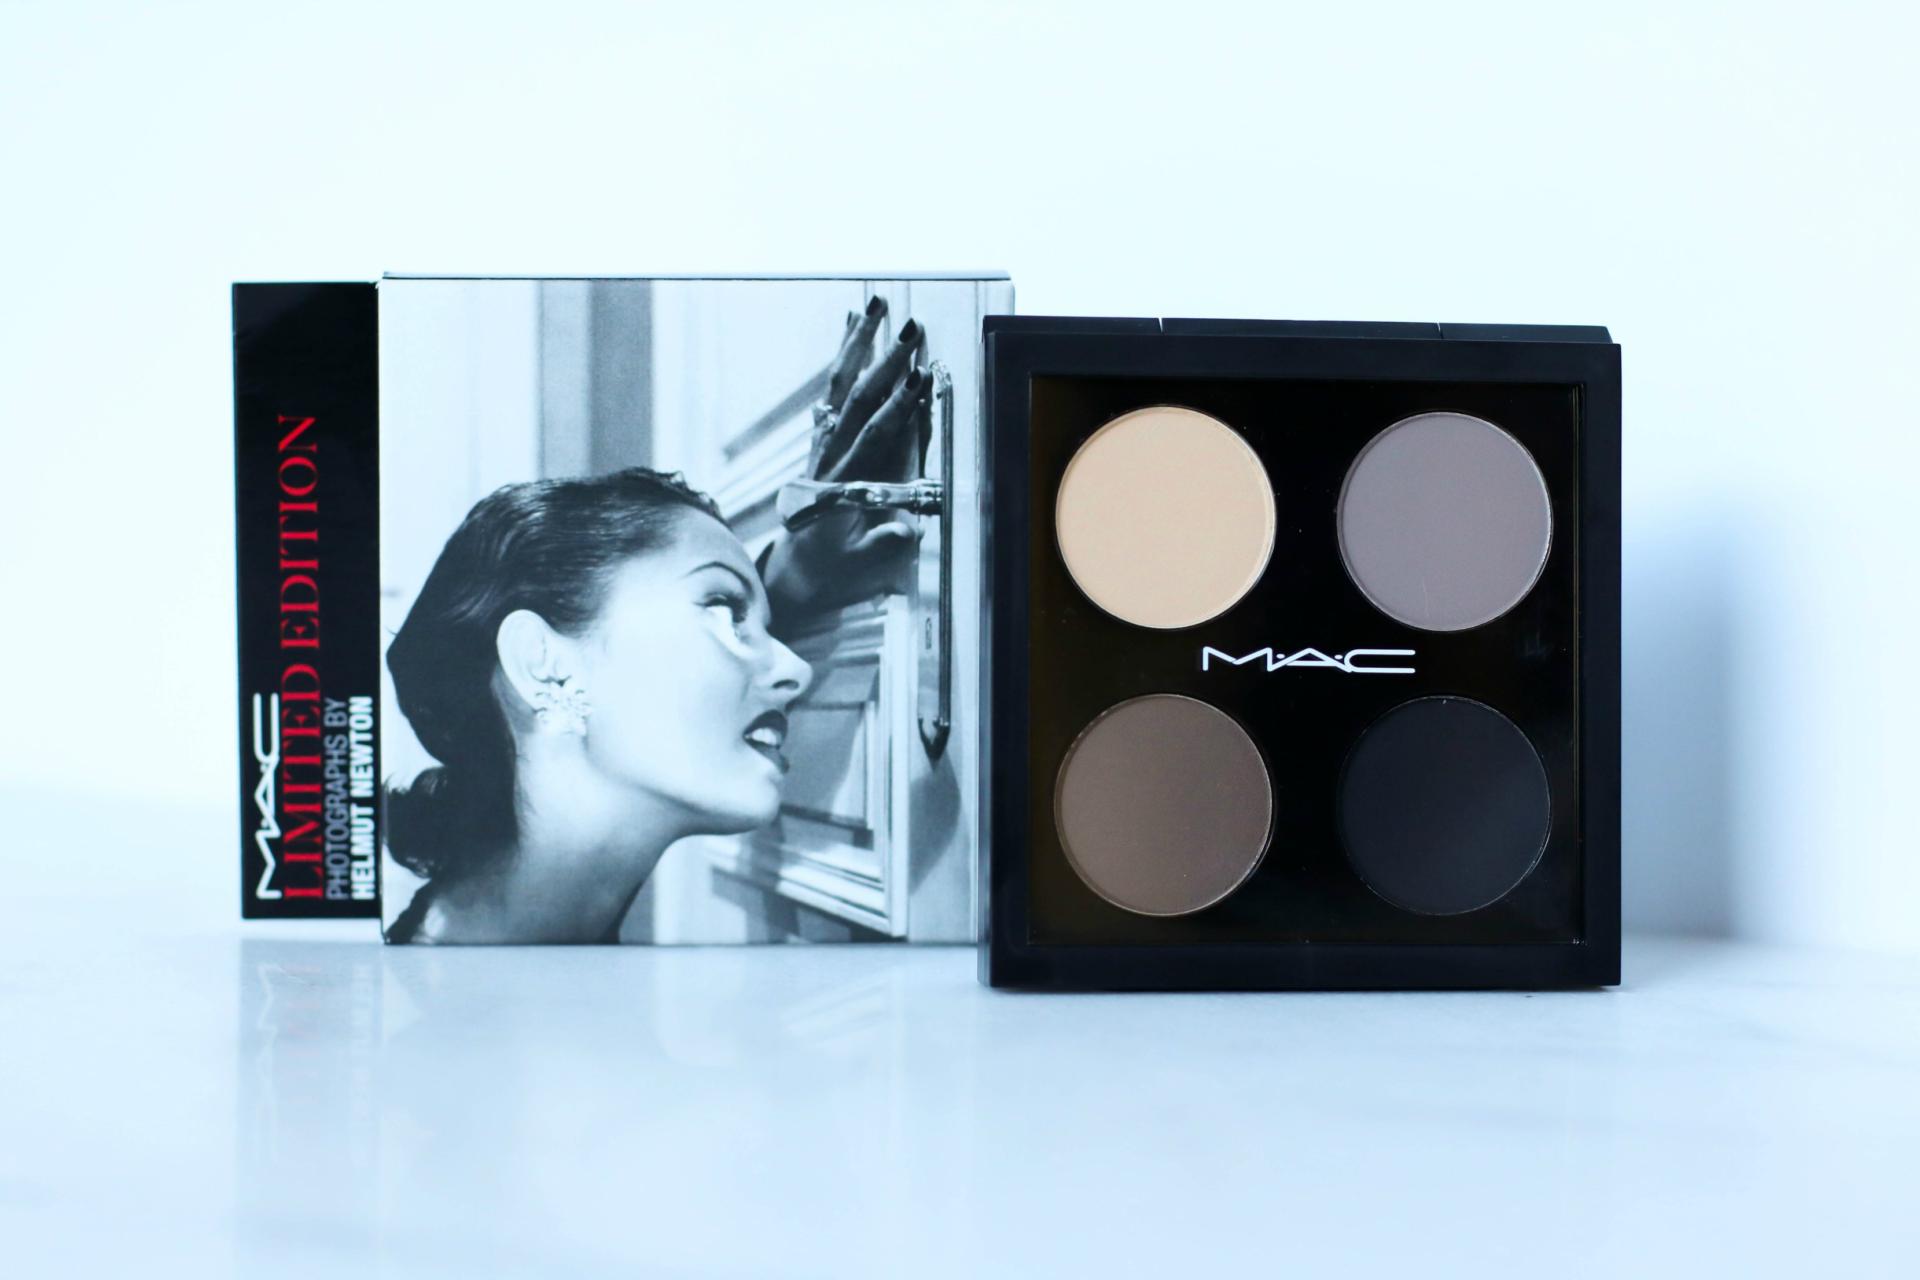 MAC Cosmetics Limited Edition Photographs By Helmut Newton